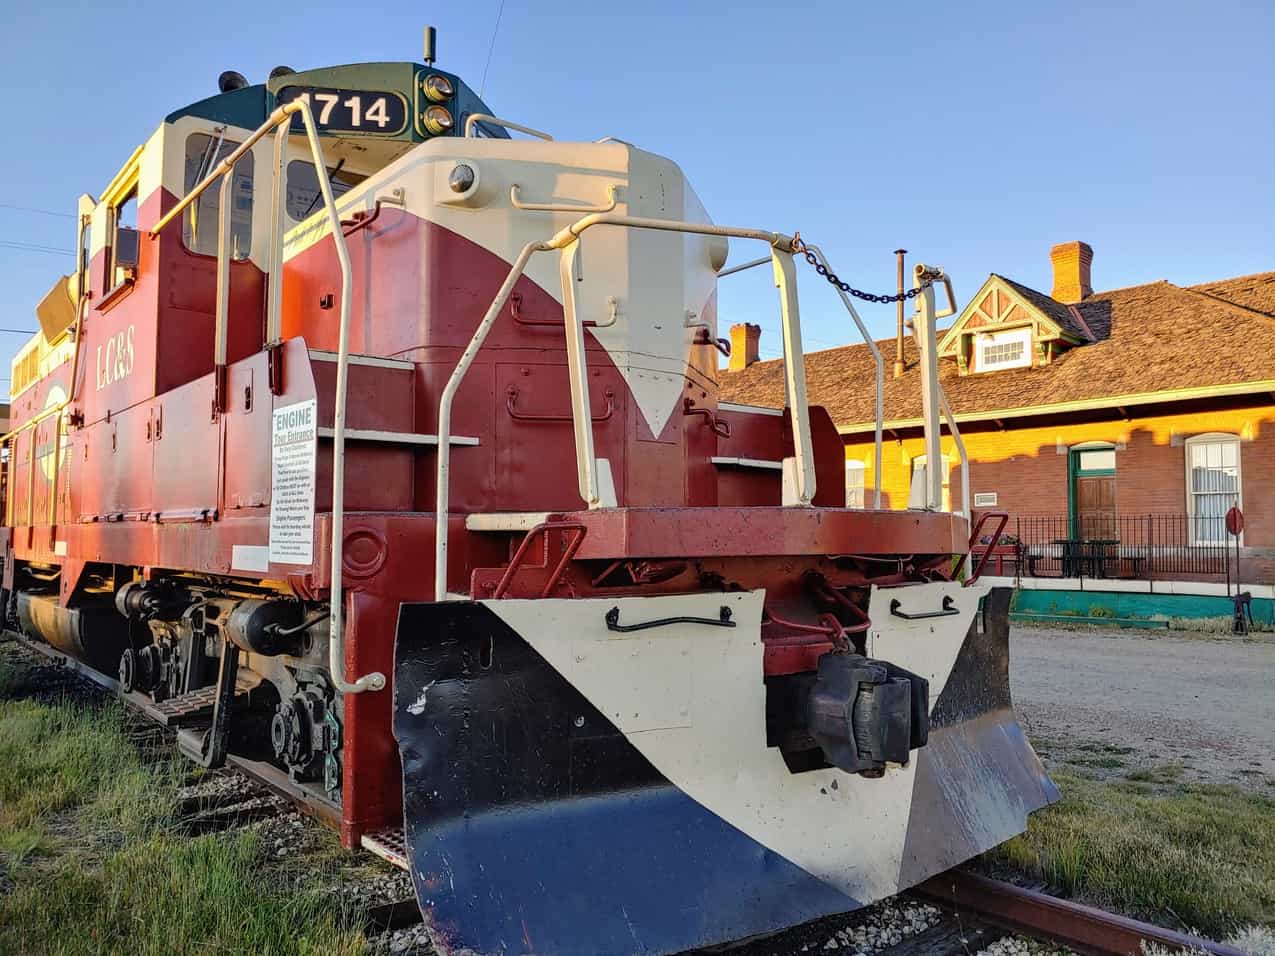 Front of a train engine on the tracks in front of the station in Leadville, Colorado